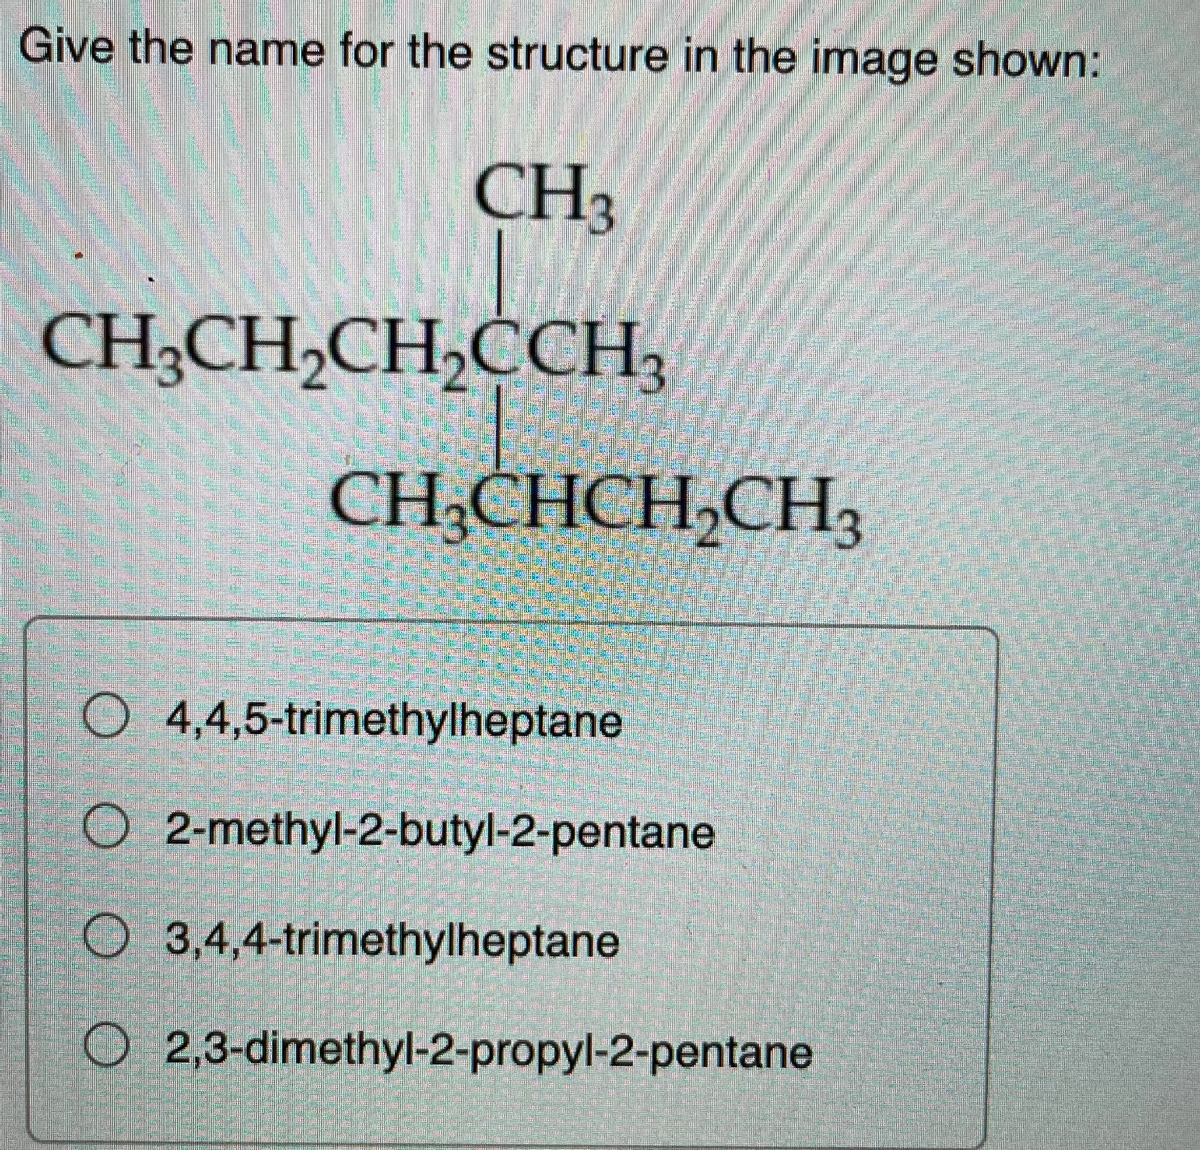 Give the name for the structure in the image shown:
CH3
CH;CH,CH,CCH3
CH;CHCH,CH3
O 4,4,5-trimethylheptane
O 2-methyl-2-butyl-2-pentane
O 3,4,4-trimethylheptane
O 2,3-dimethyl-2-propyl-2-pentane
